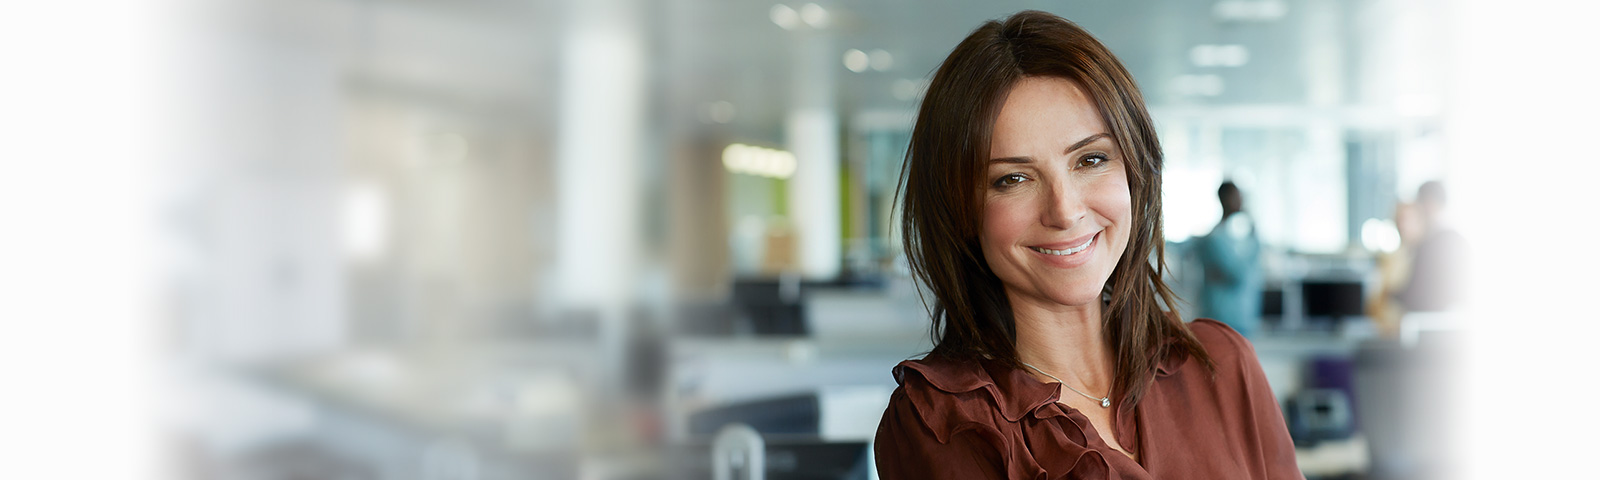 single woman smiling in office